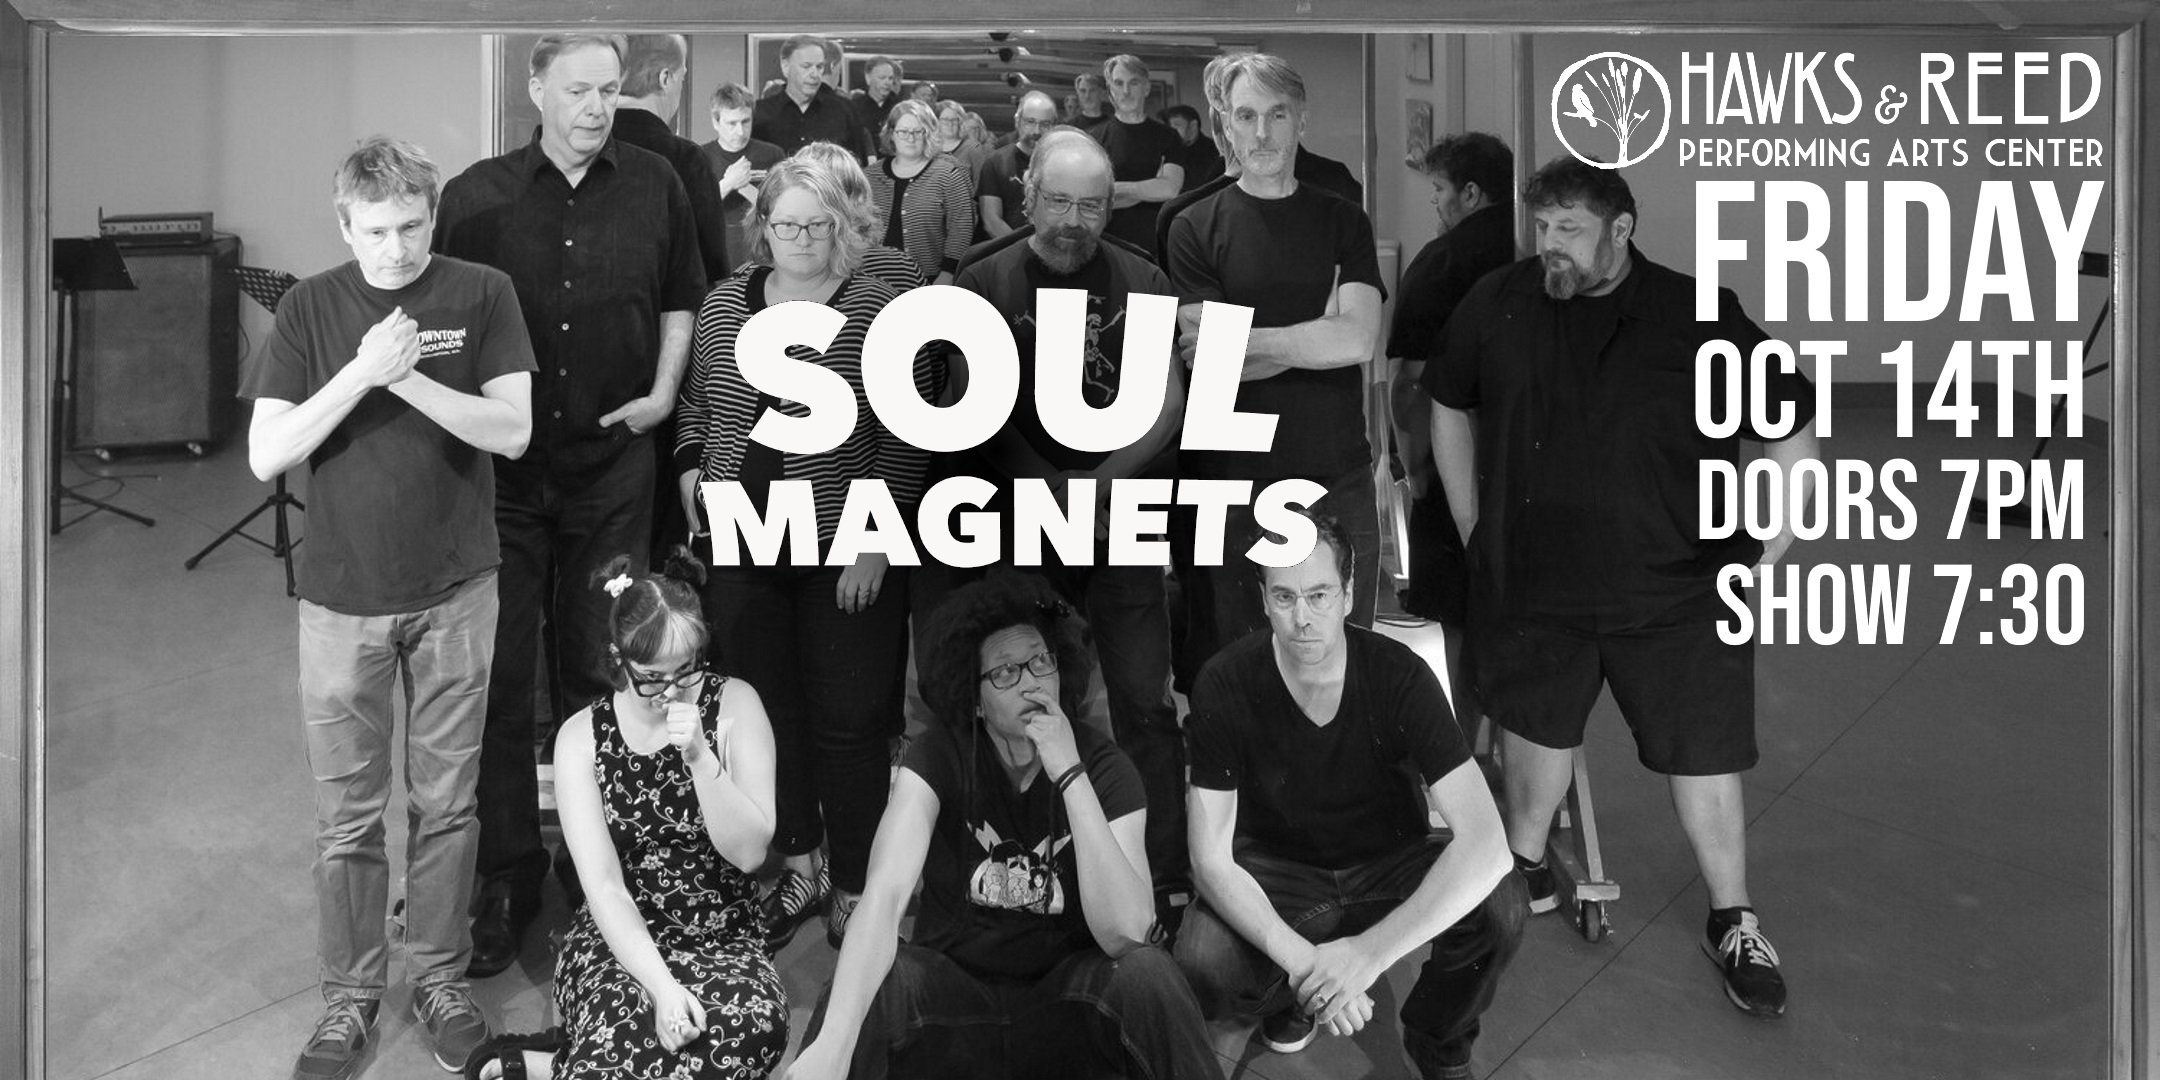 Soul Magnets at Hawks & Reed